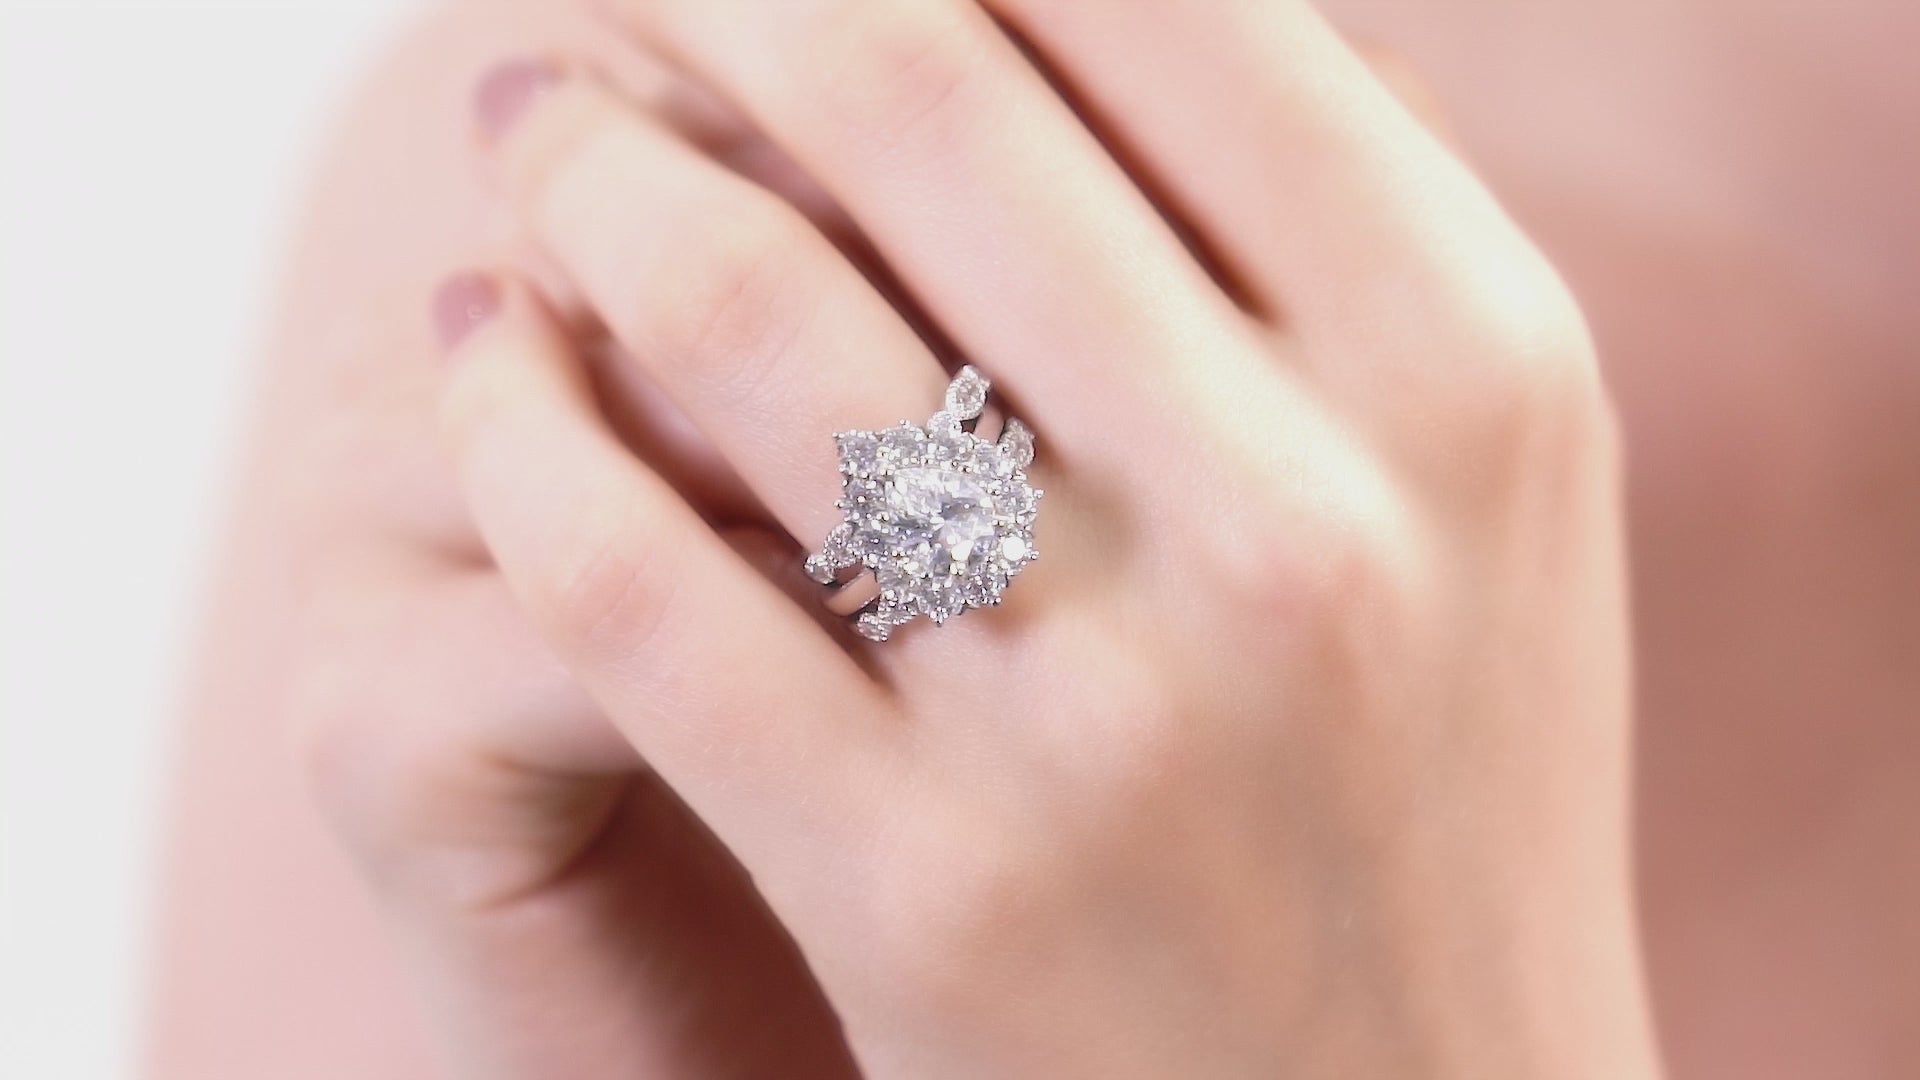 Video Contains Halo Pear CZ Ring Set in Sterling Silver. Style Number VR477-02